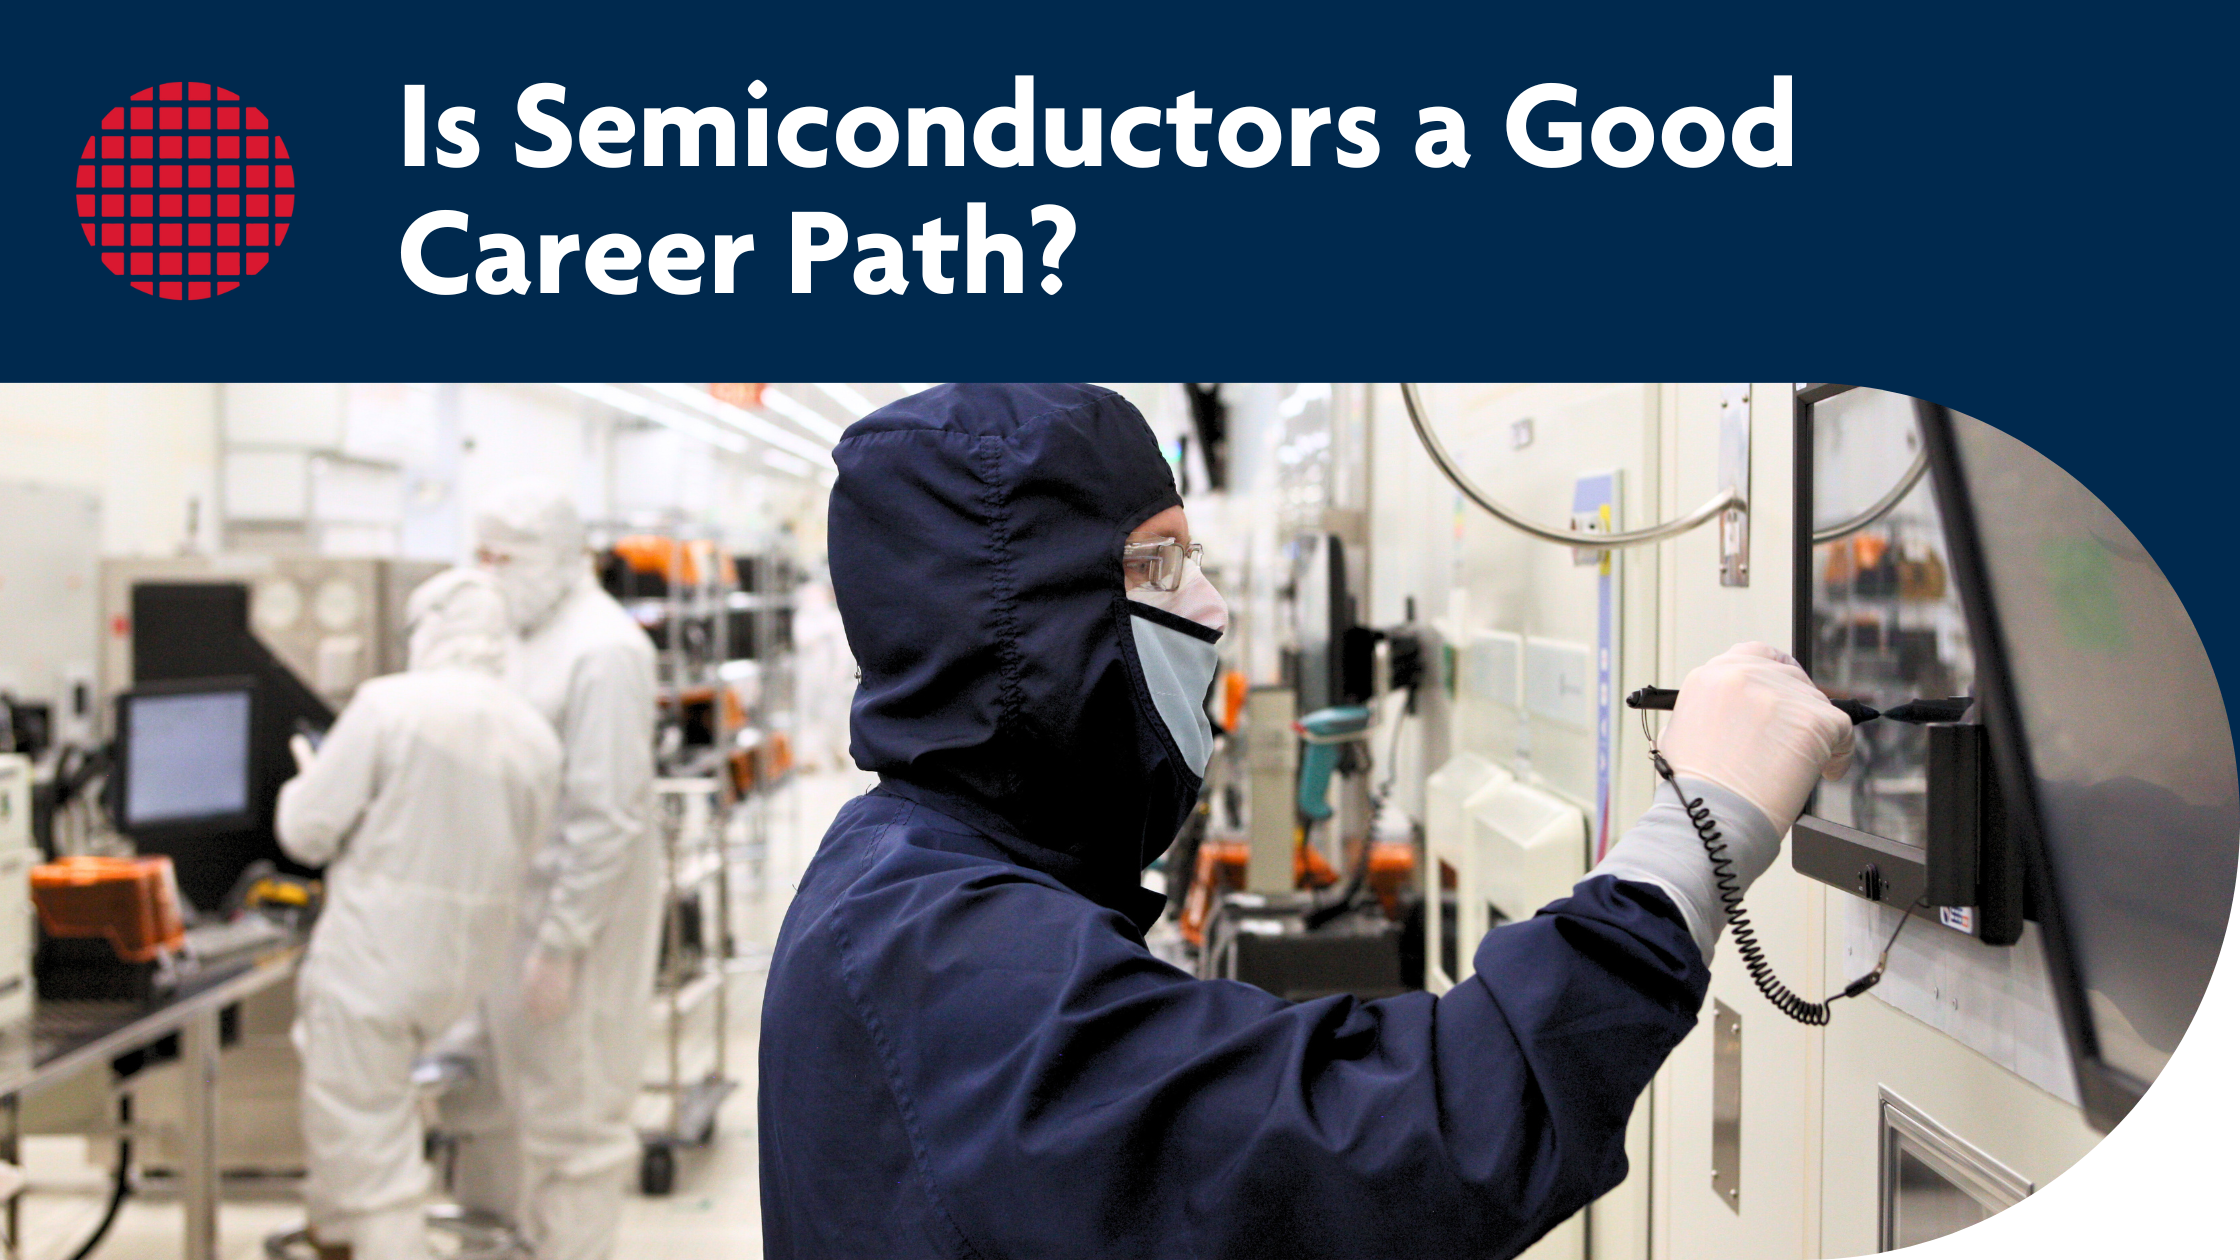 Is semiconductors a good career path?